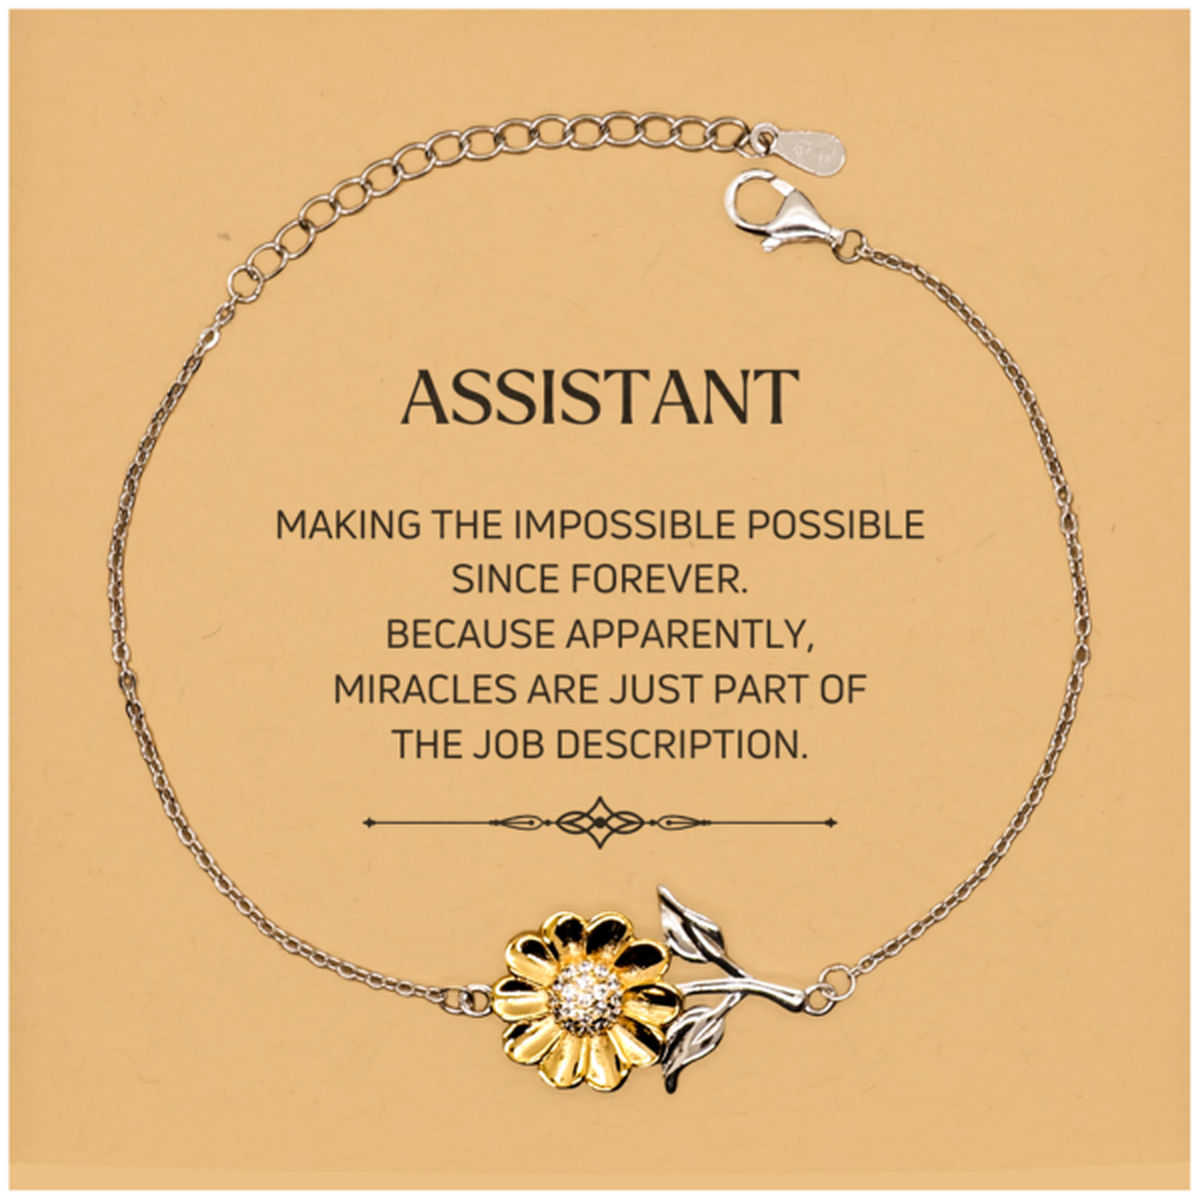 Funny Assistant Gifts, Miracles are just part of the job description, Inspirational Birthday Christmas Sunflower Bracelet For Assistant, Men, Women, Coworkers, Friends, Boss